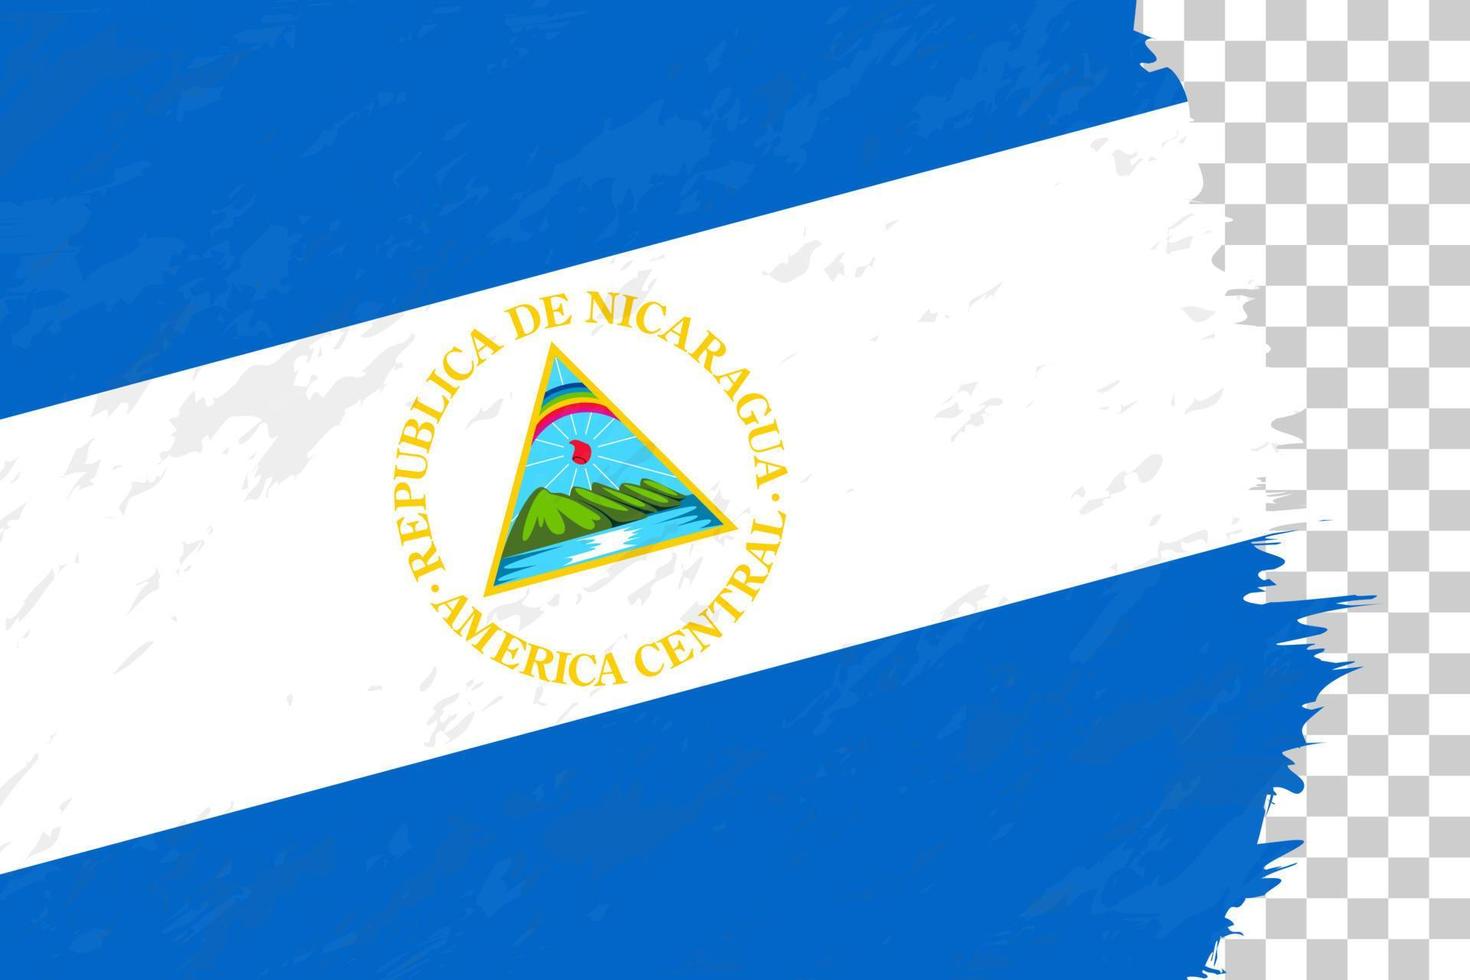 Horizontal Abstract Grunge Brushed Flag of Nicaragua on Transparent Grid. vector